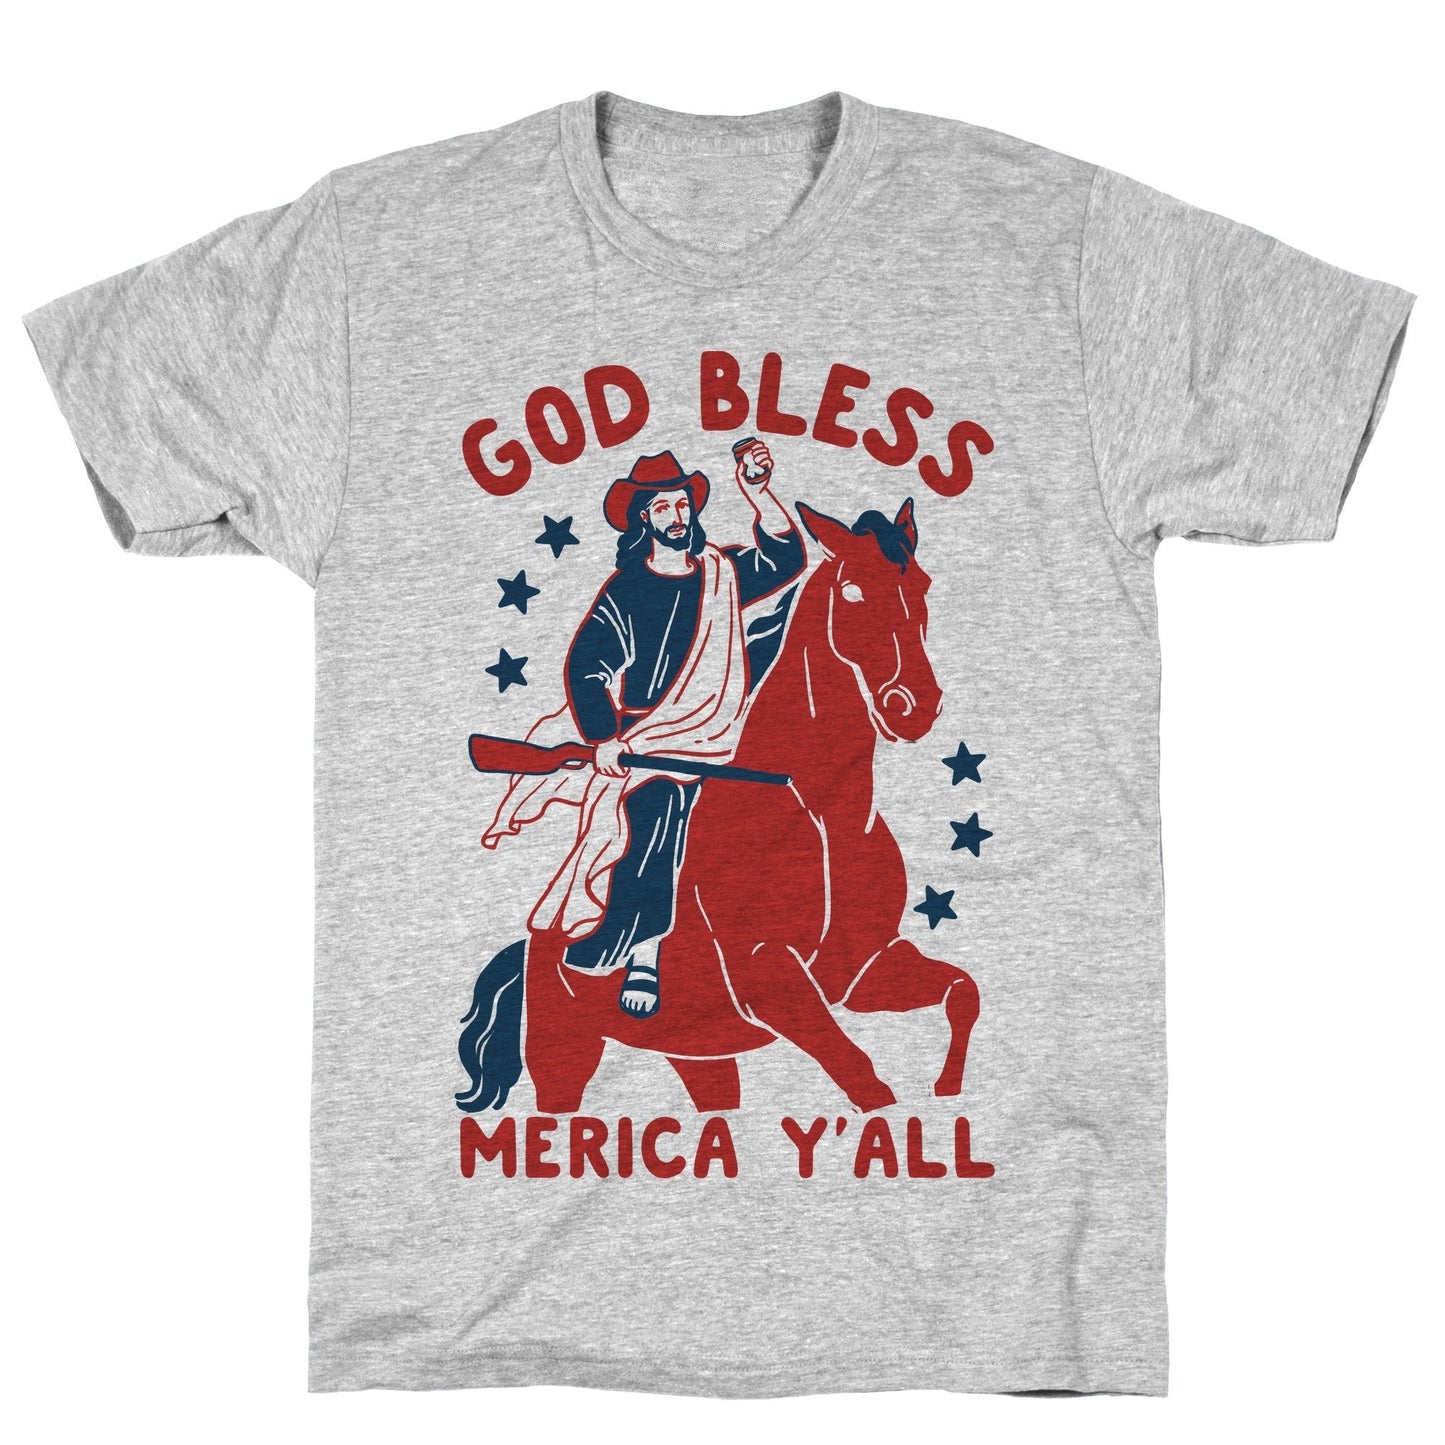 God Bless Merica Y'all: Cowboy Jesus Athletic Gray Unisex Cotton Tee